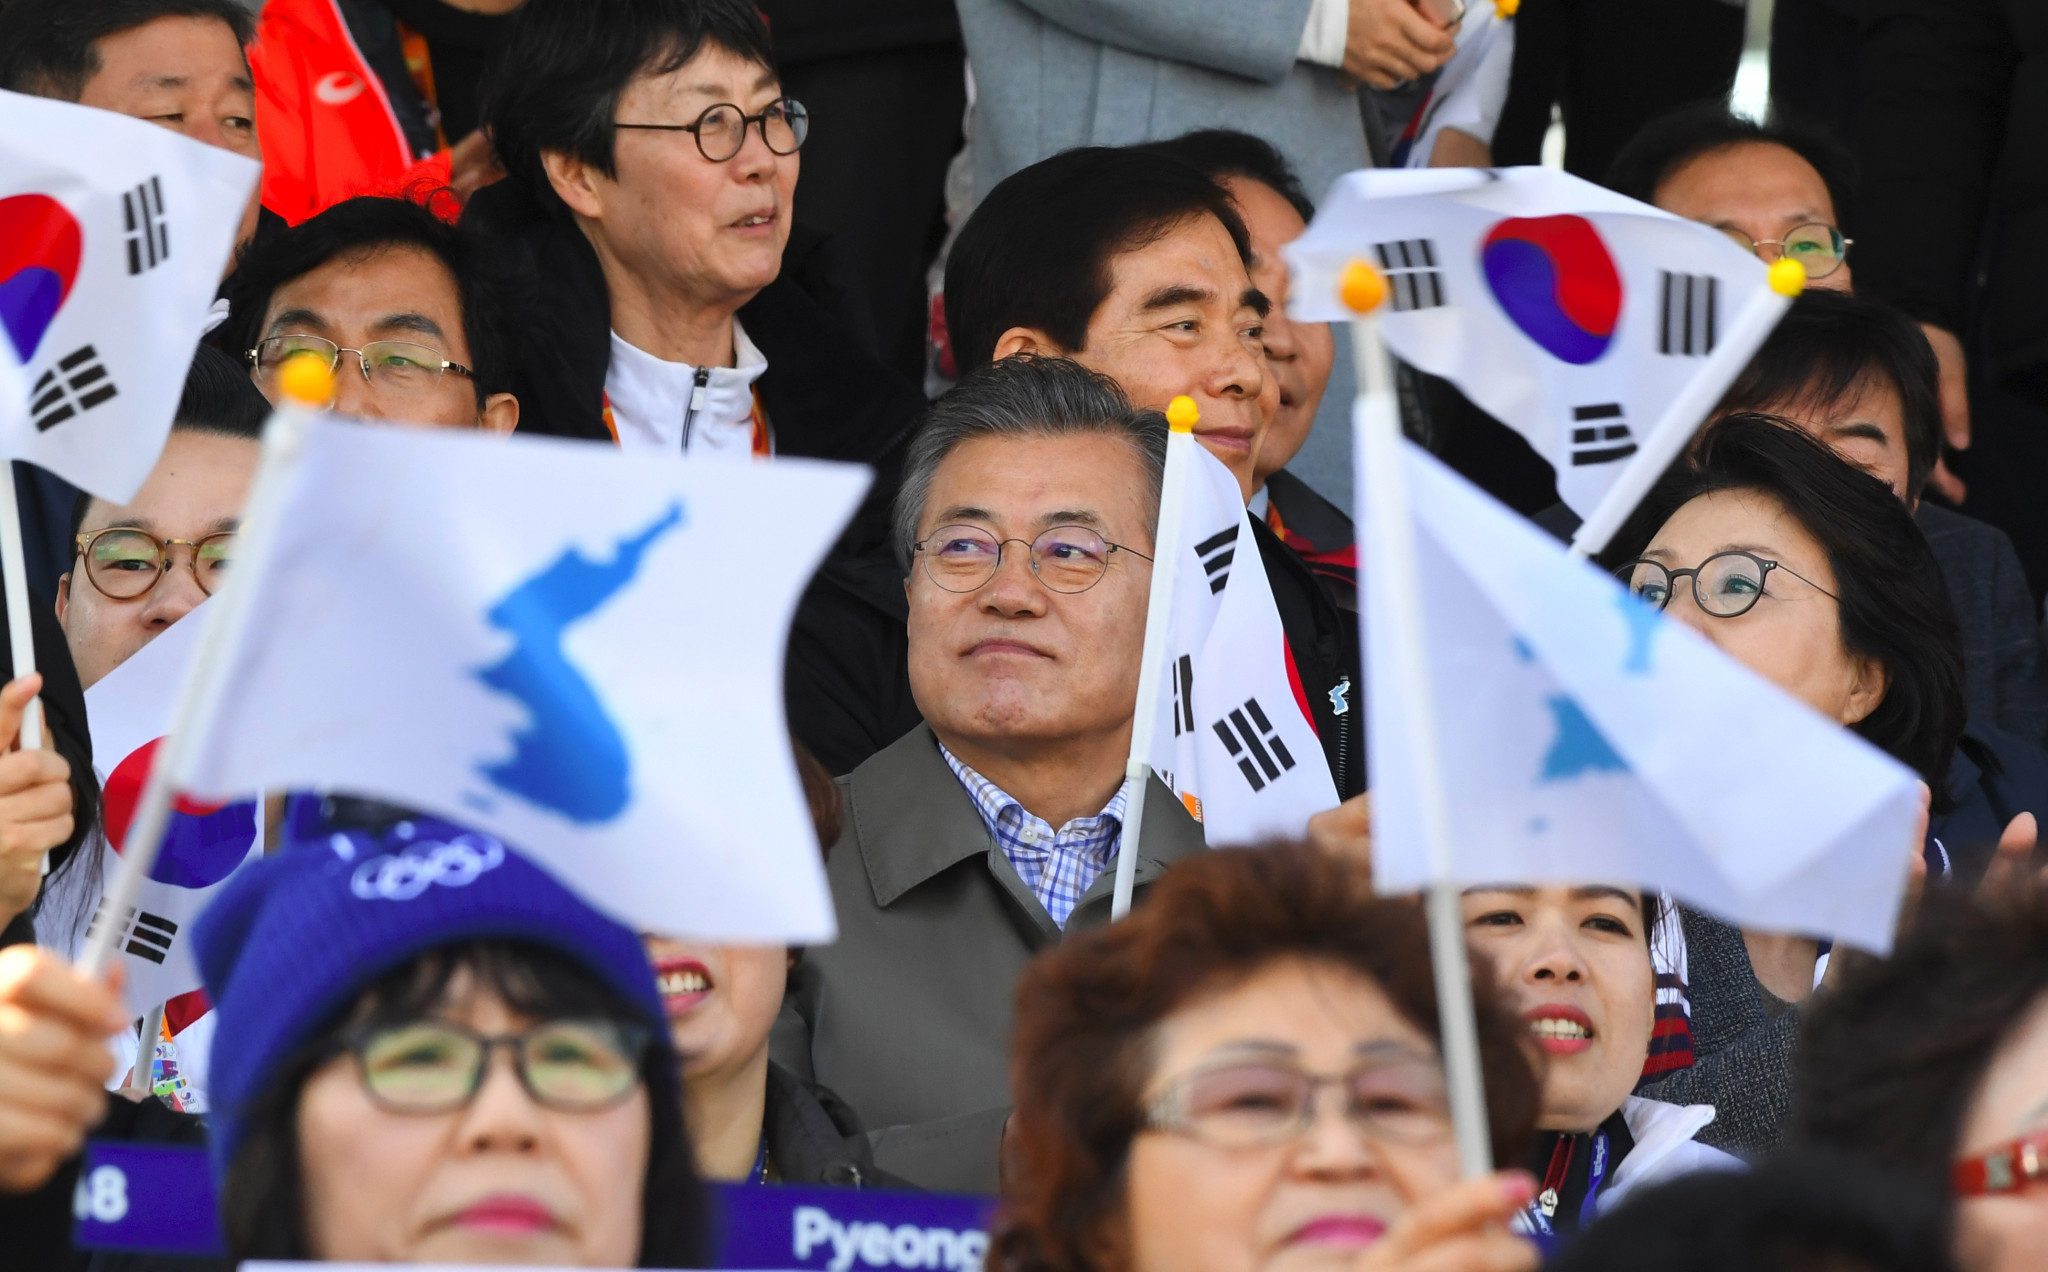 South Korean President Moon Jae-in watches events unfold at the Alpensia Biathlon Centre ©Getty Images